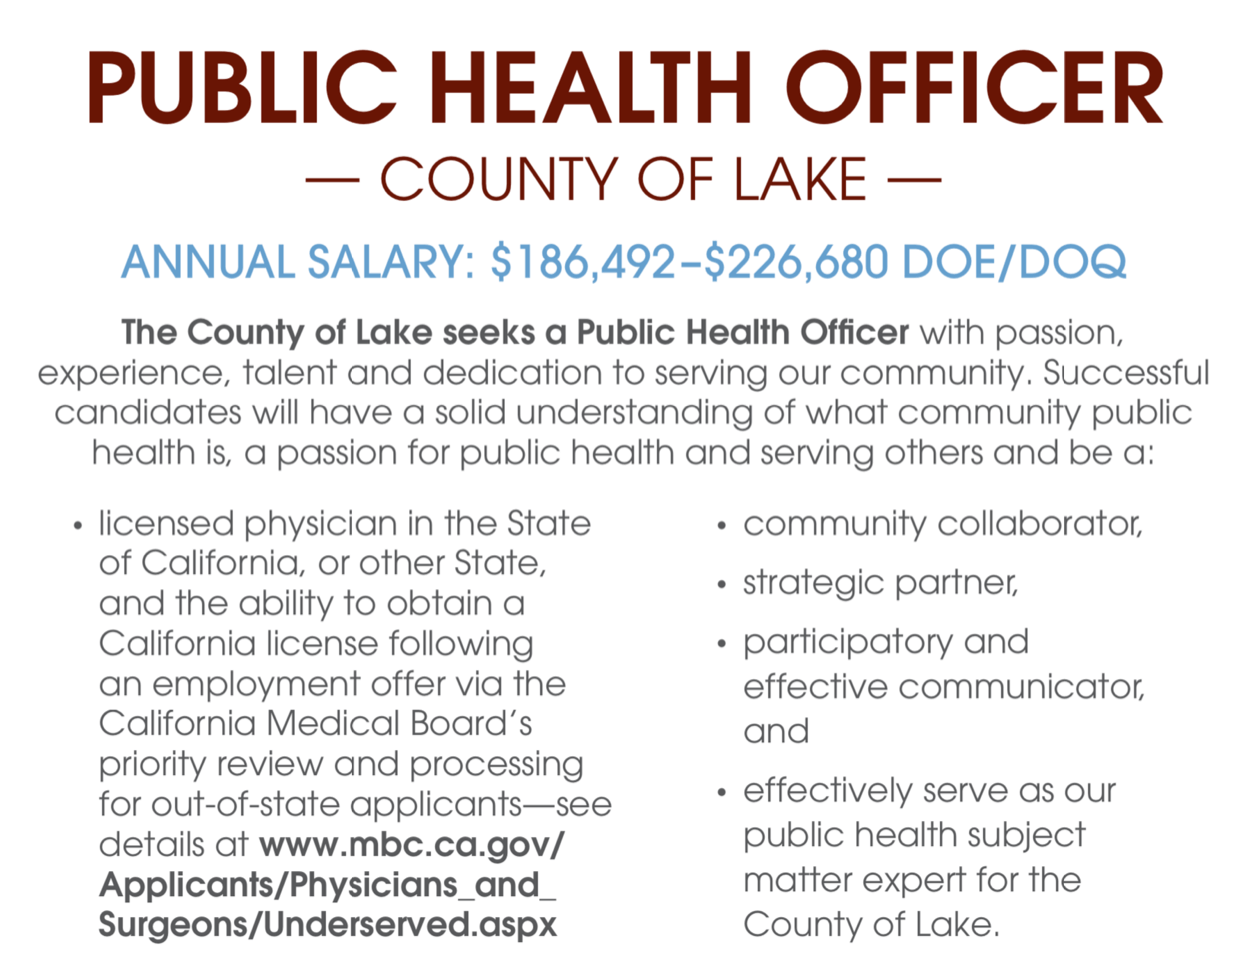 Public Health Officer County of Lake